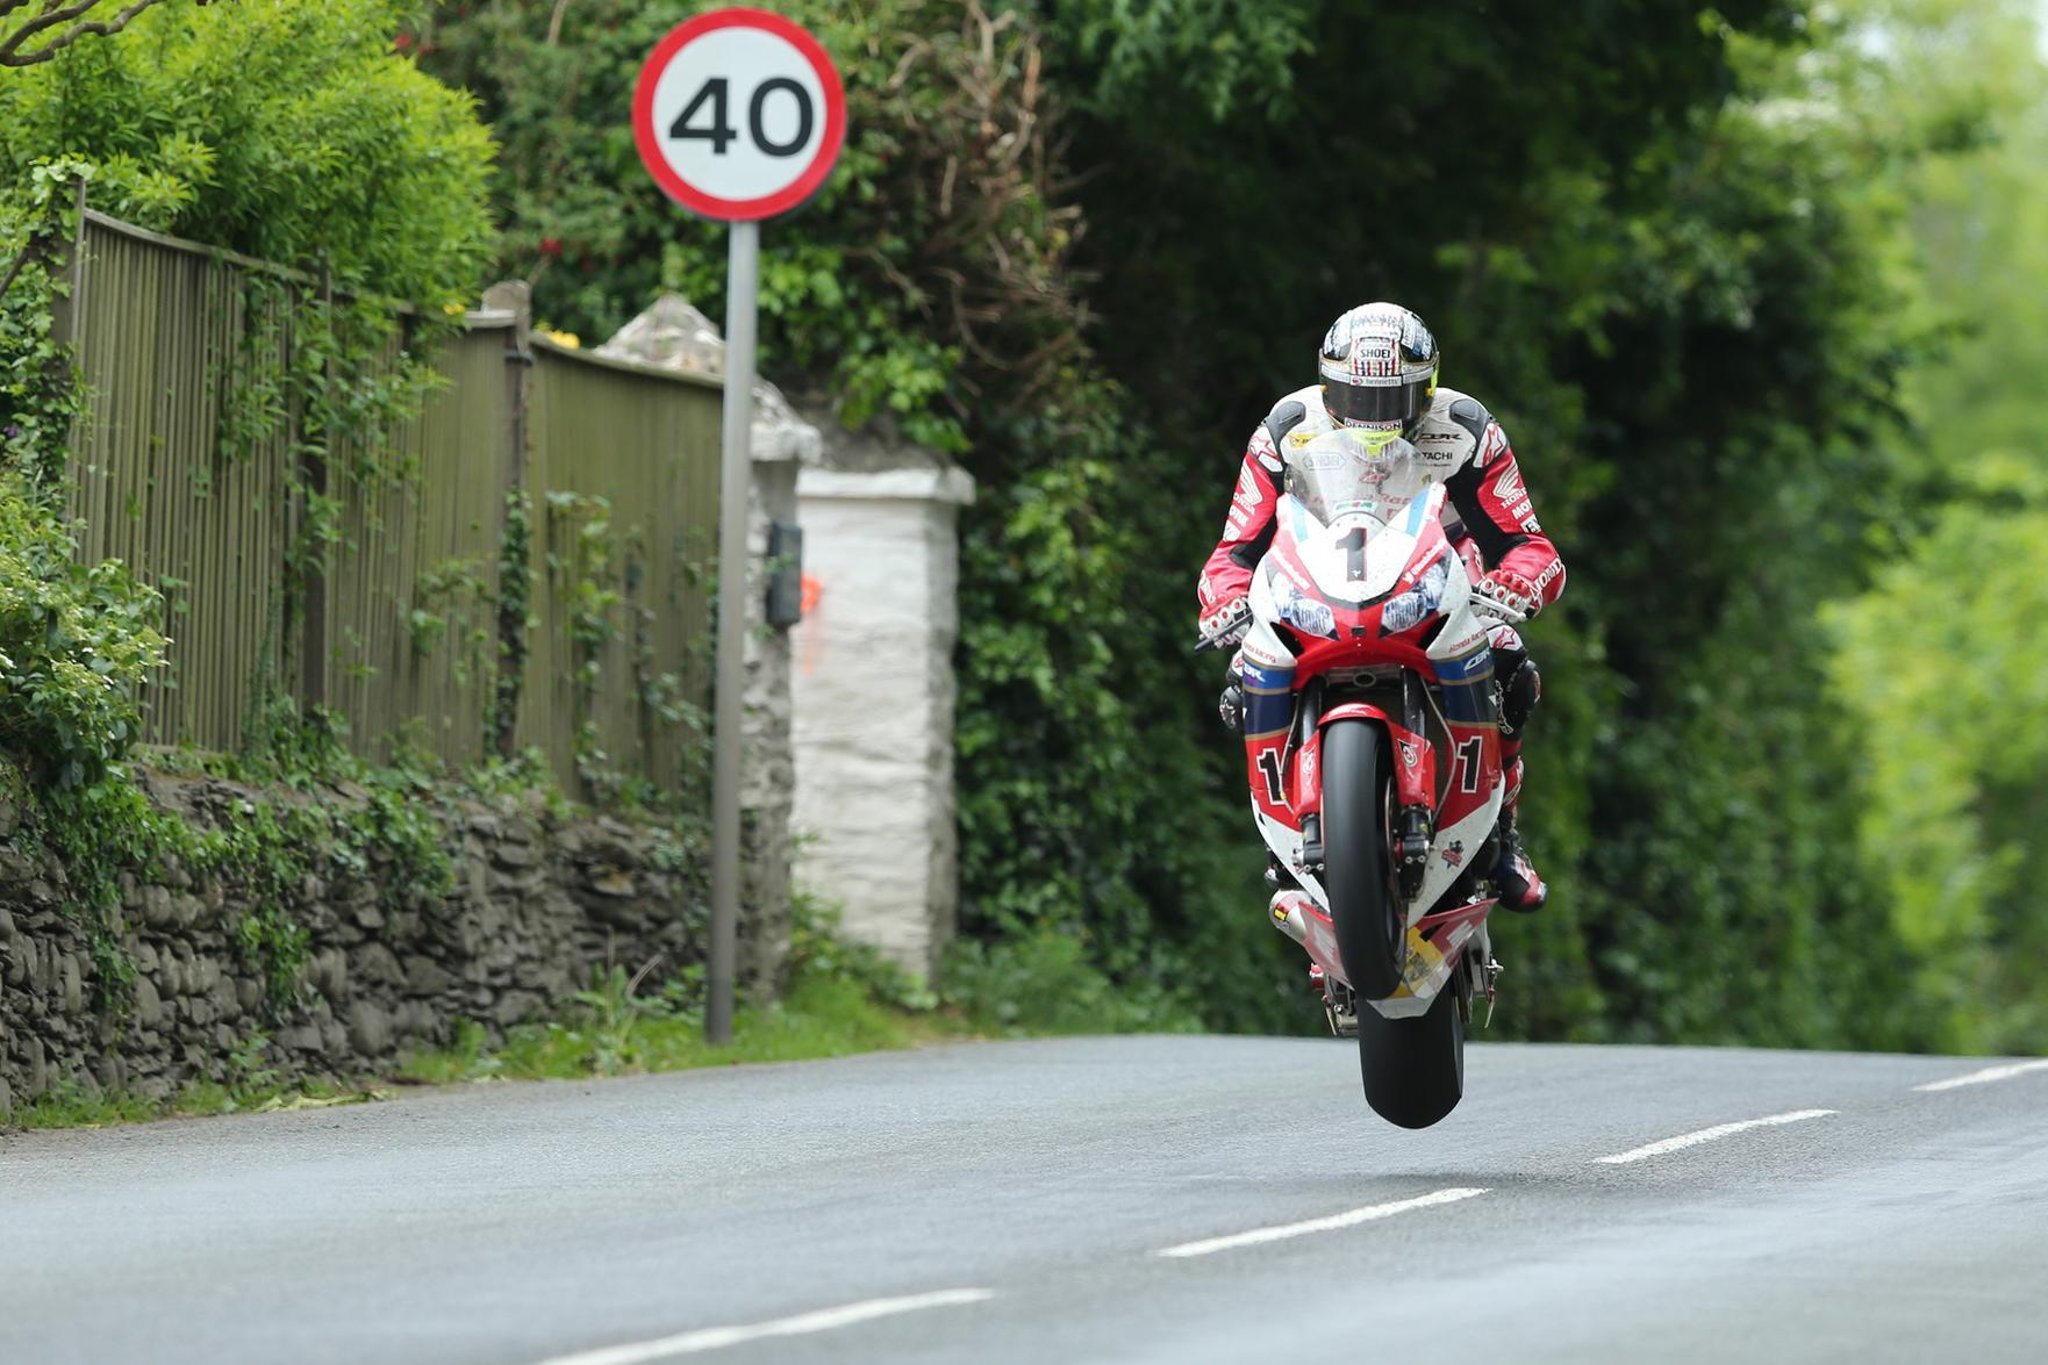 John McGuinness given number one plate as Superbike start numbers revealed for Isle of Man TT